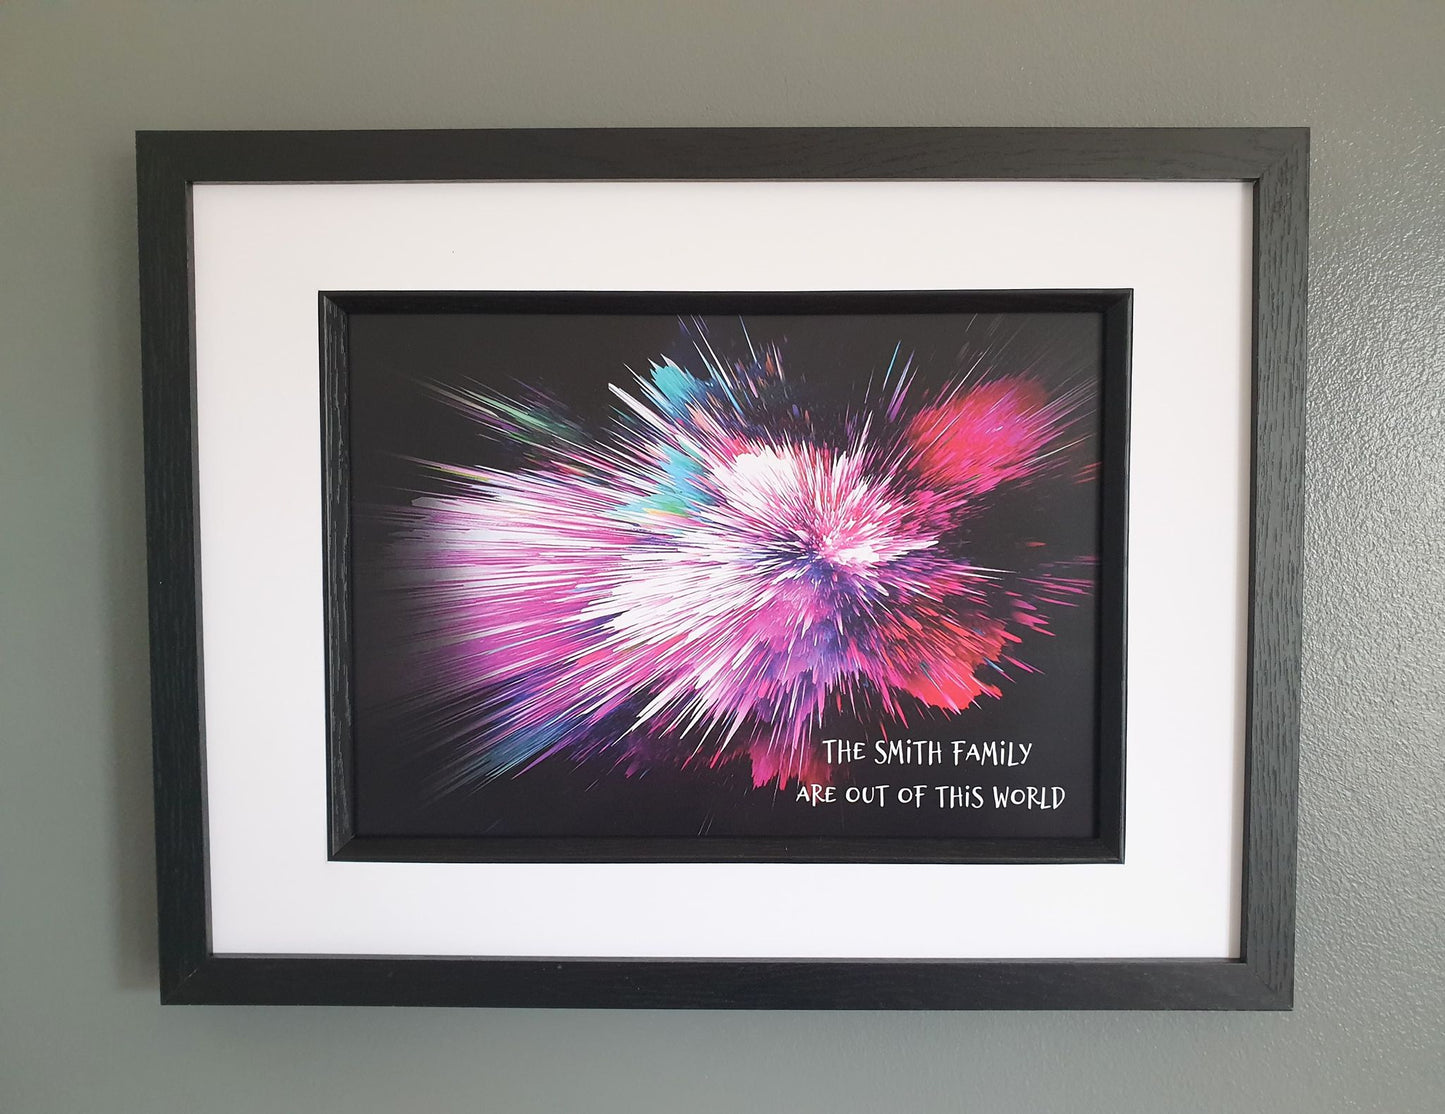 Colour Explosion personalised framed print - Family is Out of this World